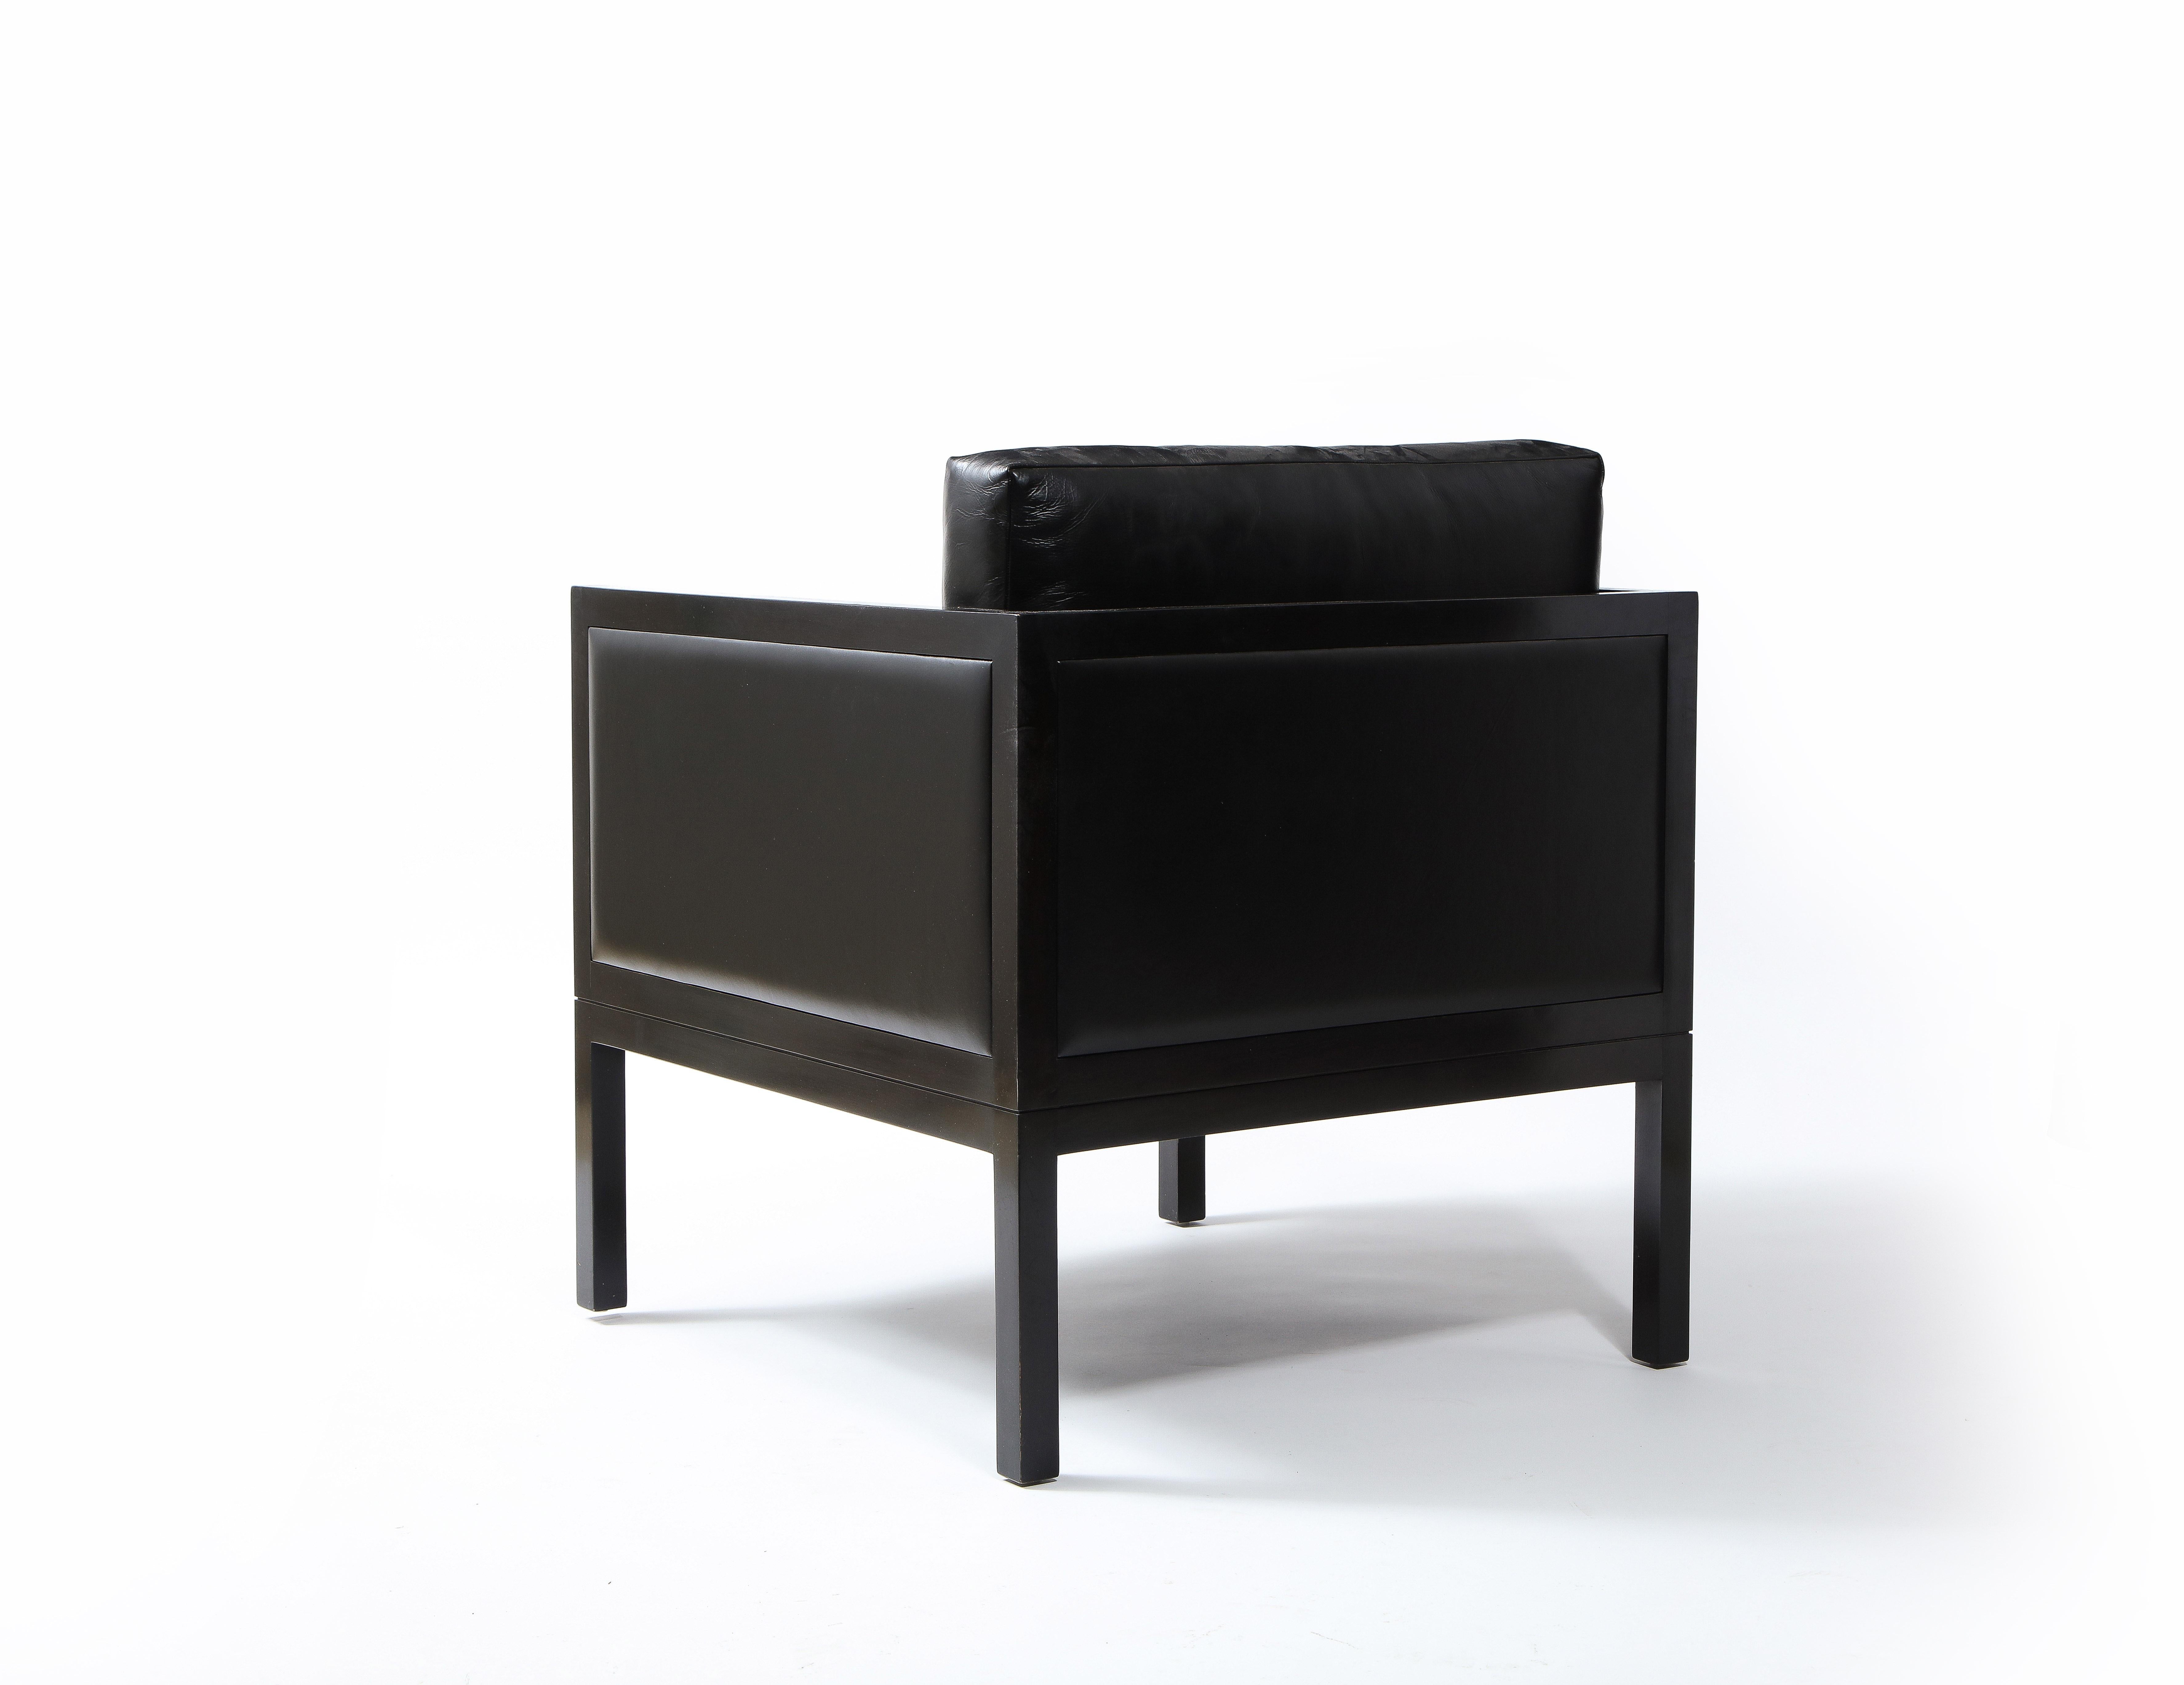 Steel MEIER/FERRER Modernist Leather, Wood and Metal Club Chair, USA 2010